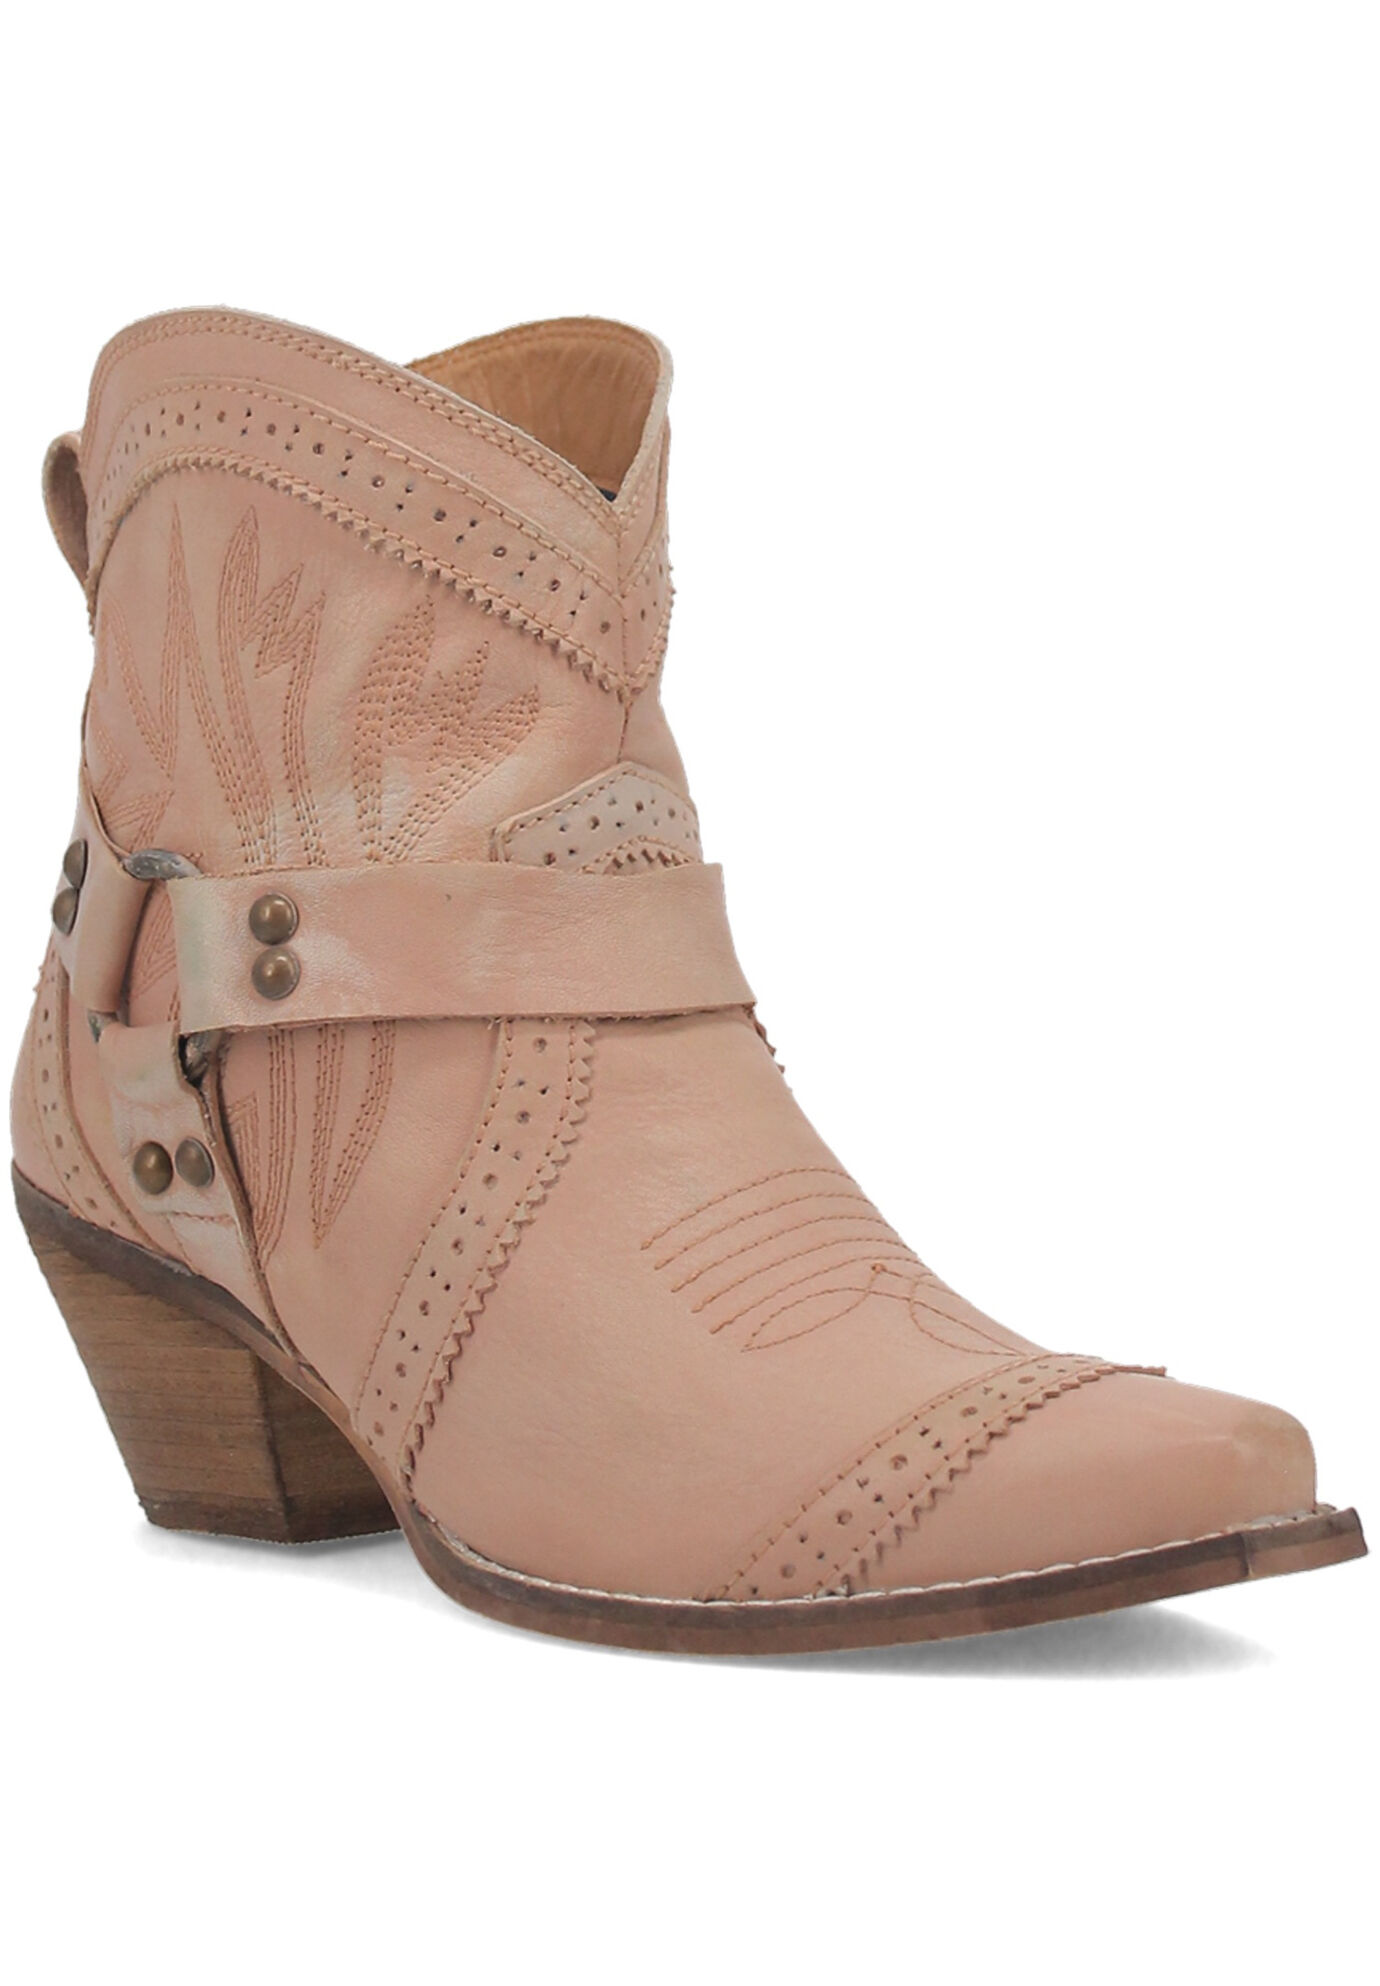 Women's Gummy Bear Western Bootie by Dingo in Natural (Size 9 M)